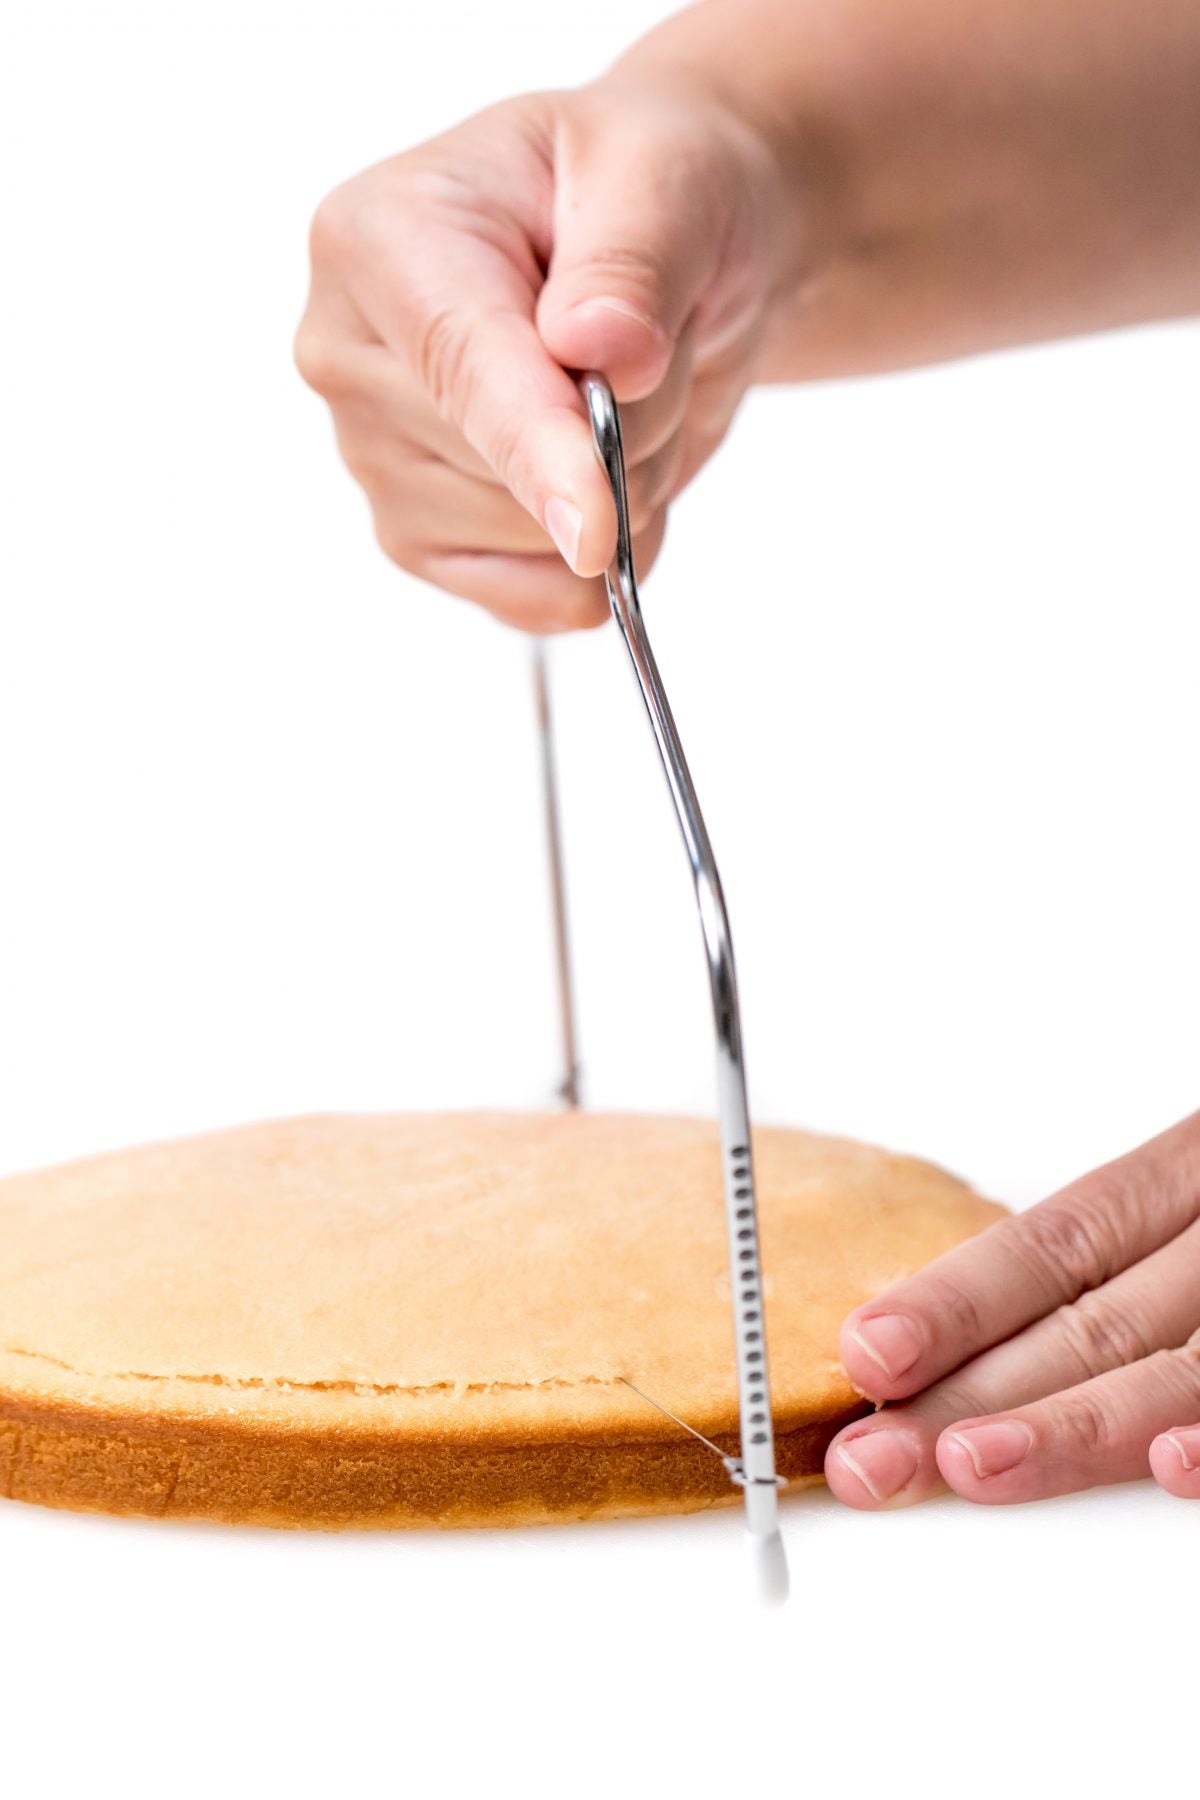 SLICE A THIN LAYER FROM THE TOP OF EACH CAKE TO CREATE A FLAT SURFACE